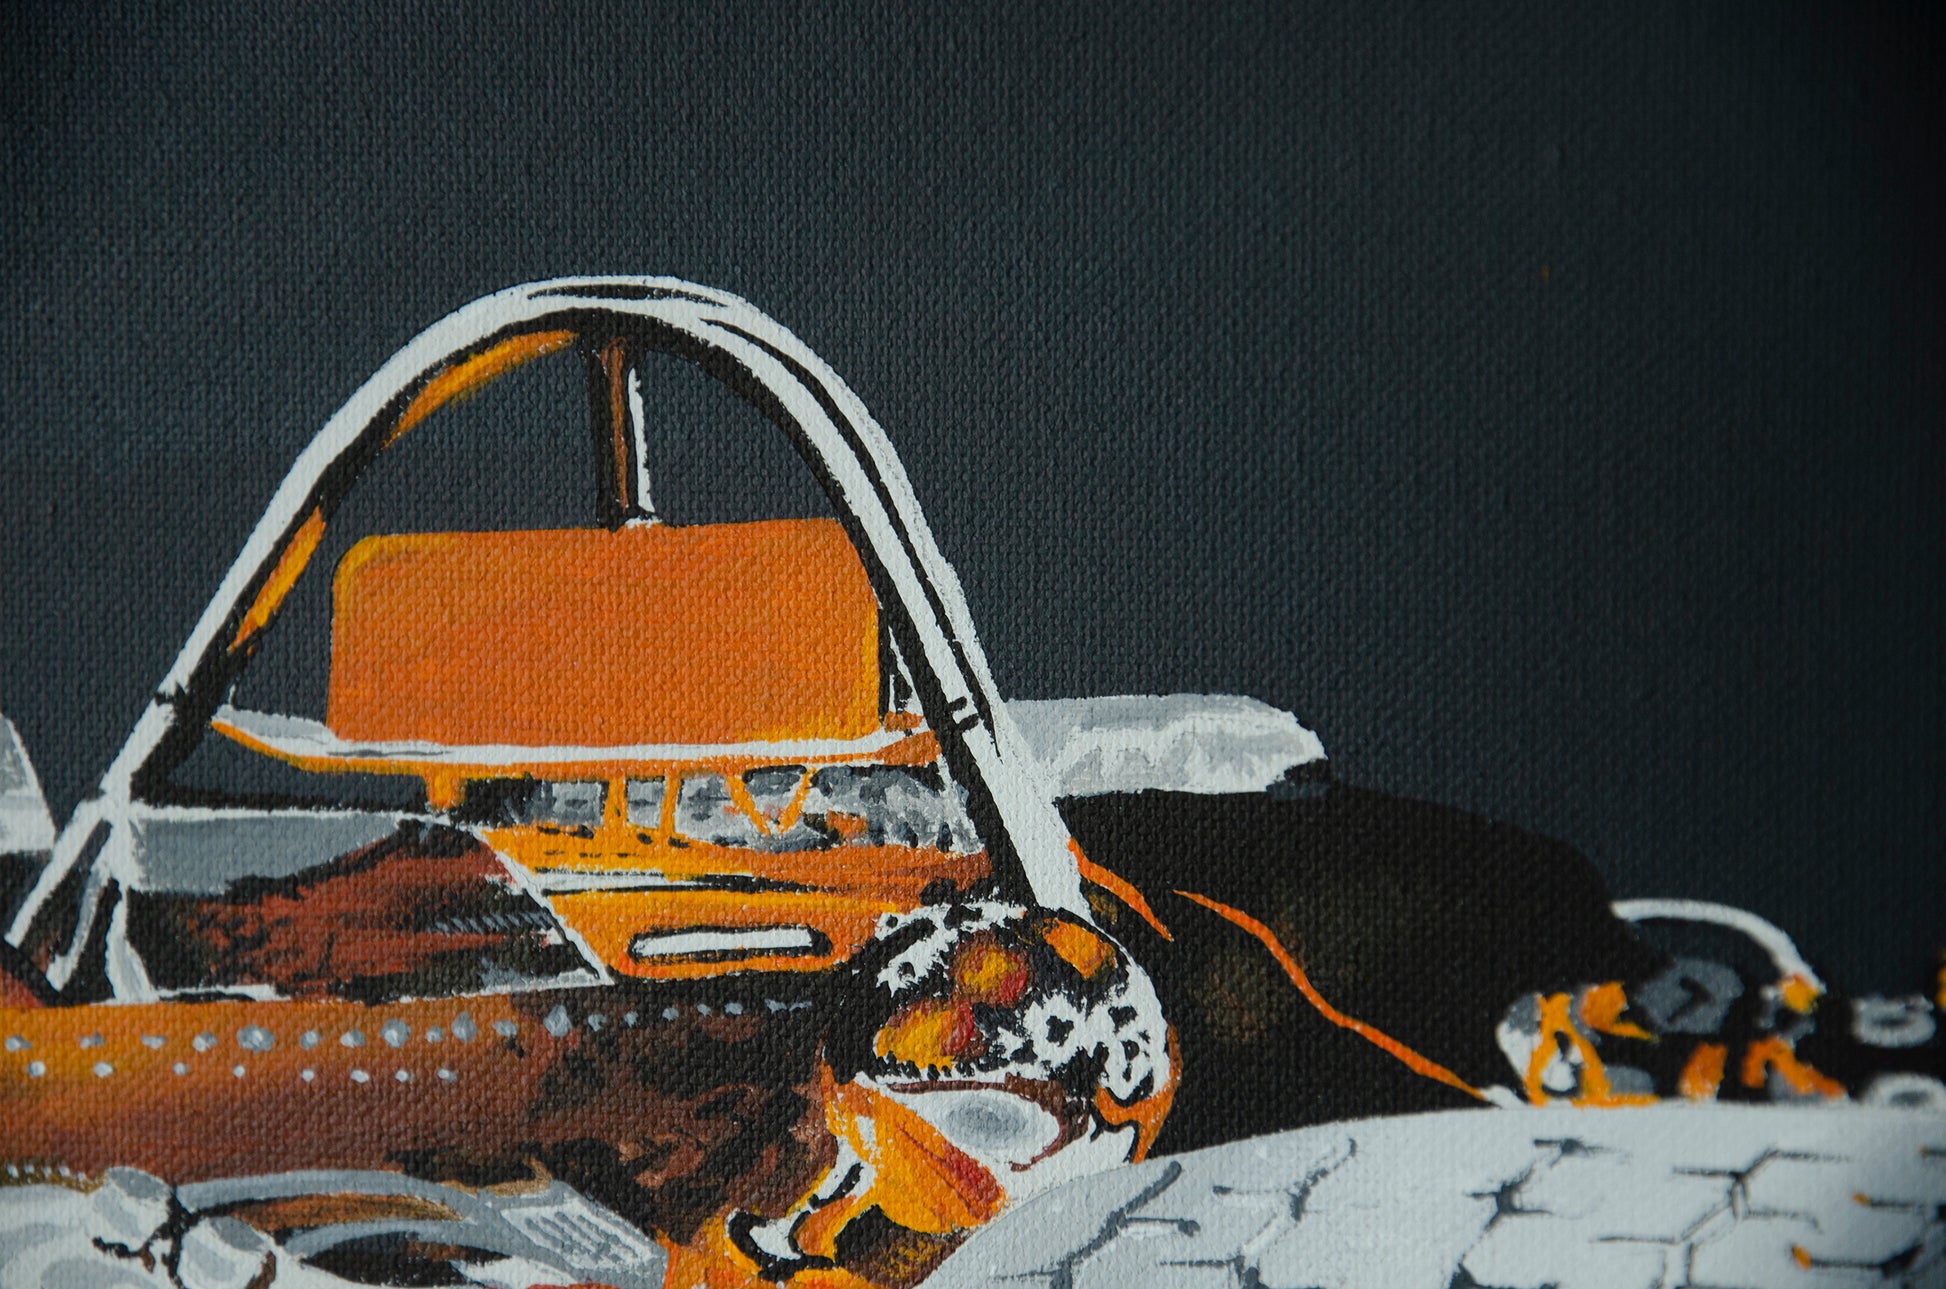 Closeup showing the detail and texture of the original painting